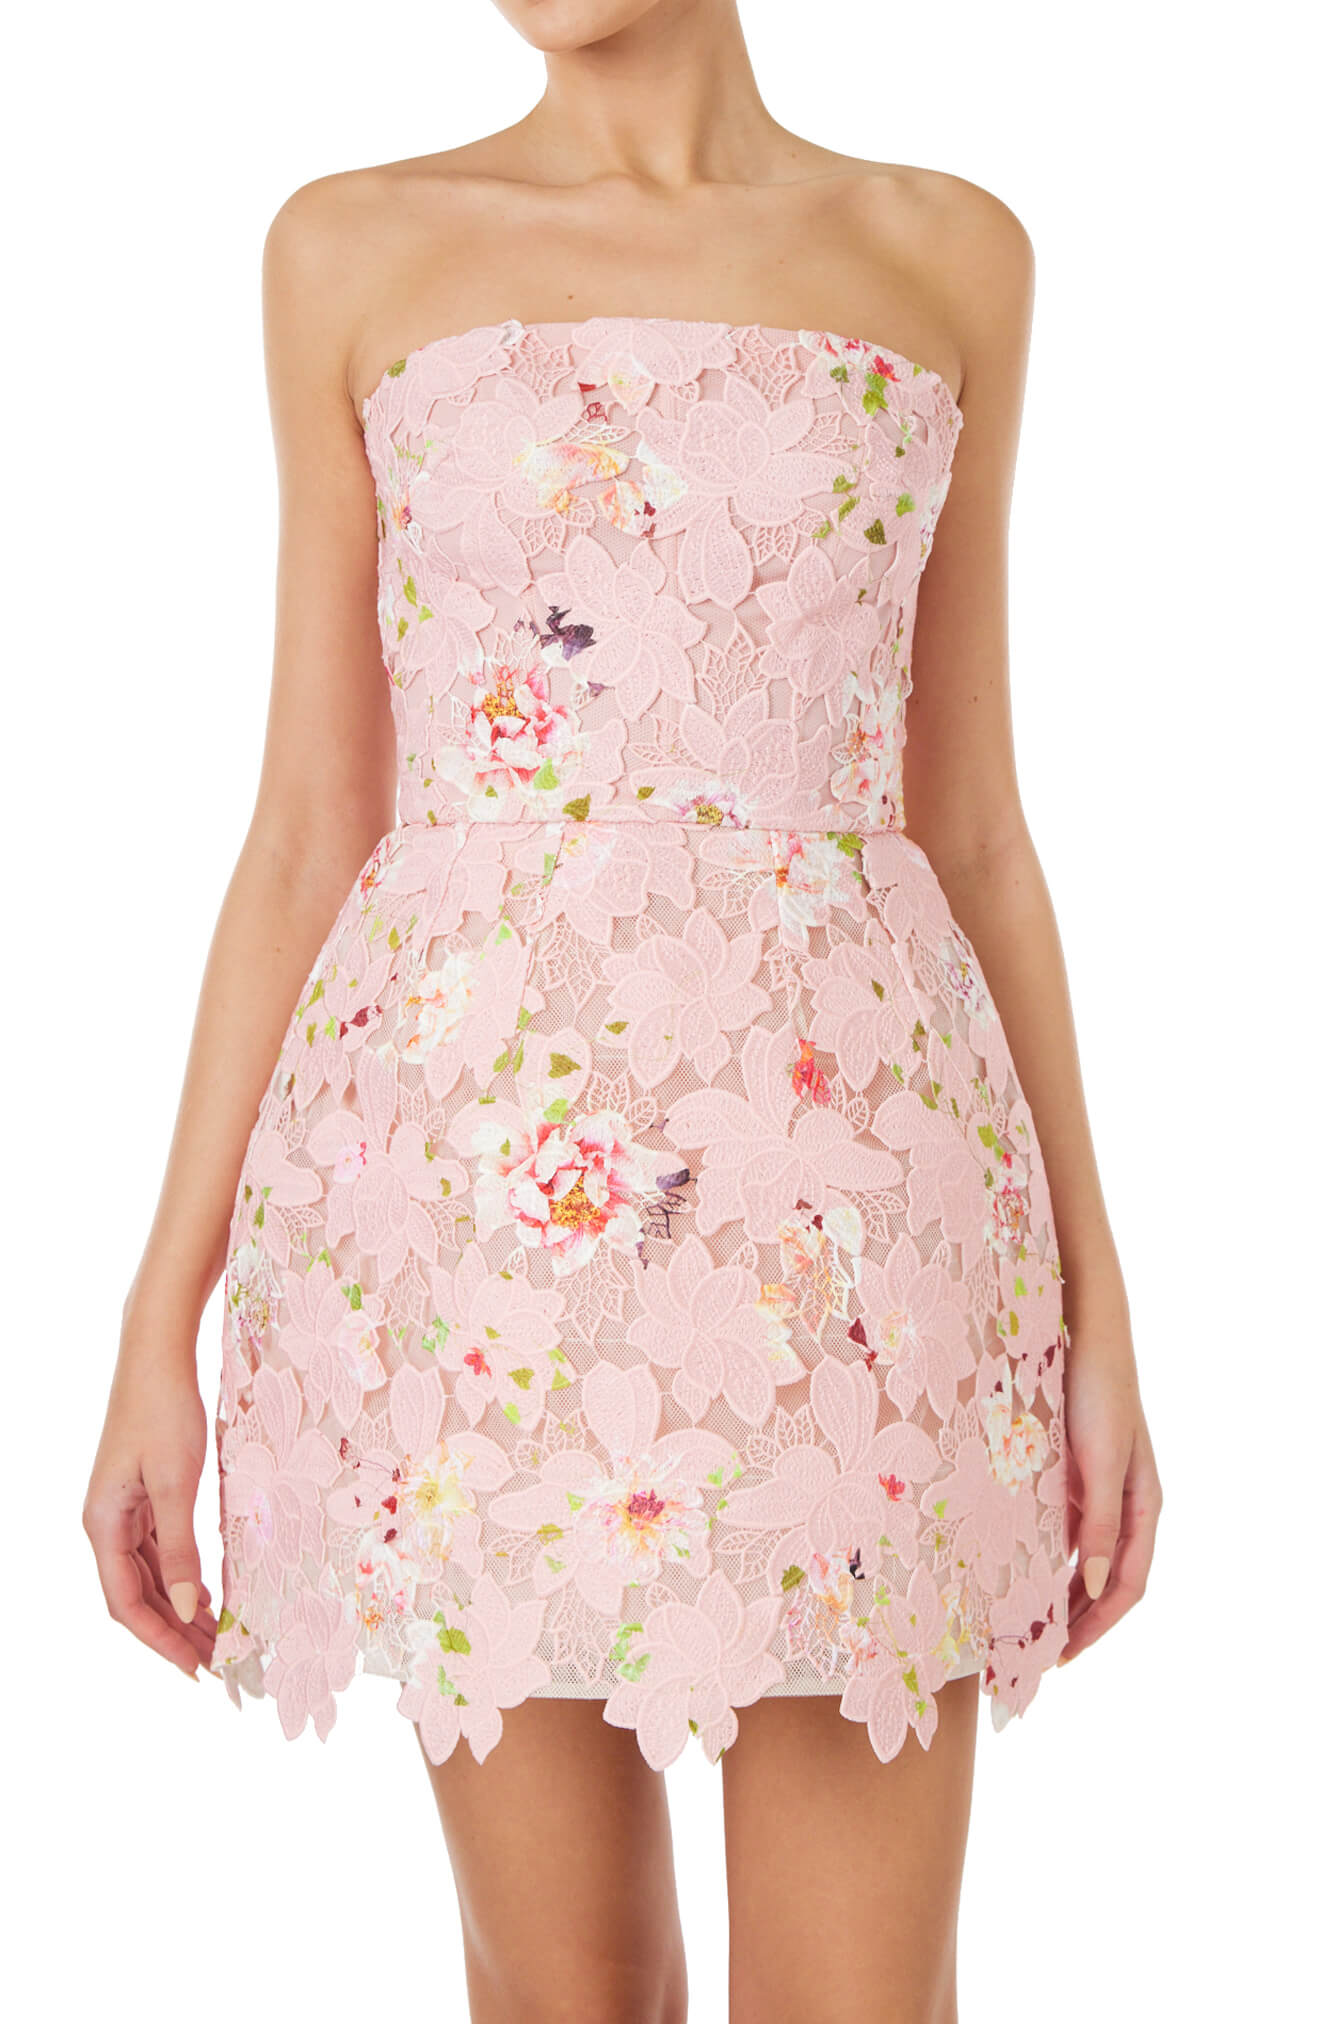 Monique Lhuillier pink peony strapless, printed lace dress with structured mini skirt.